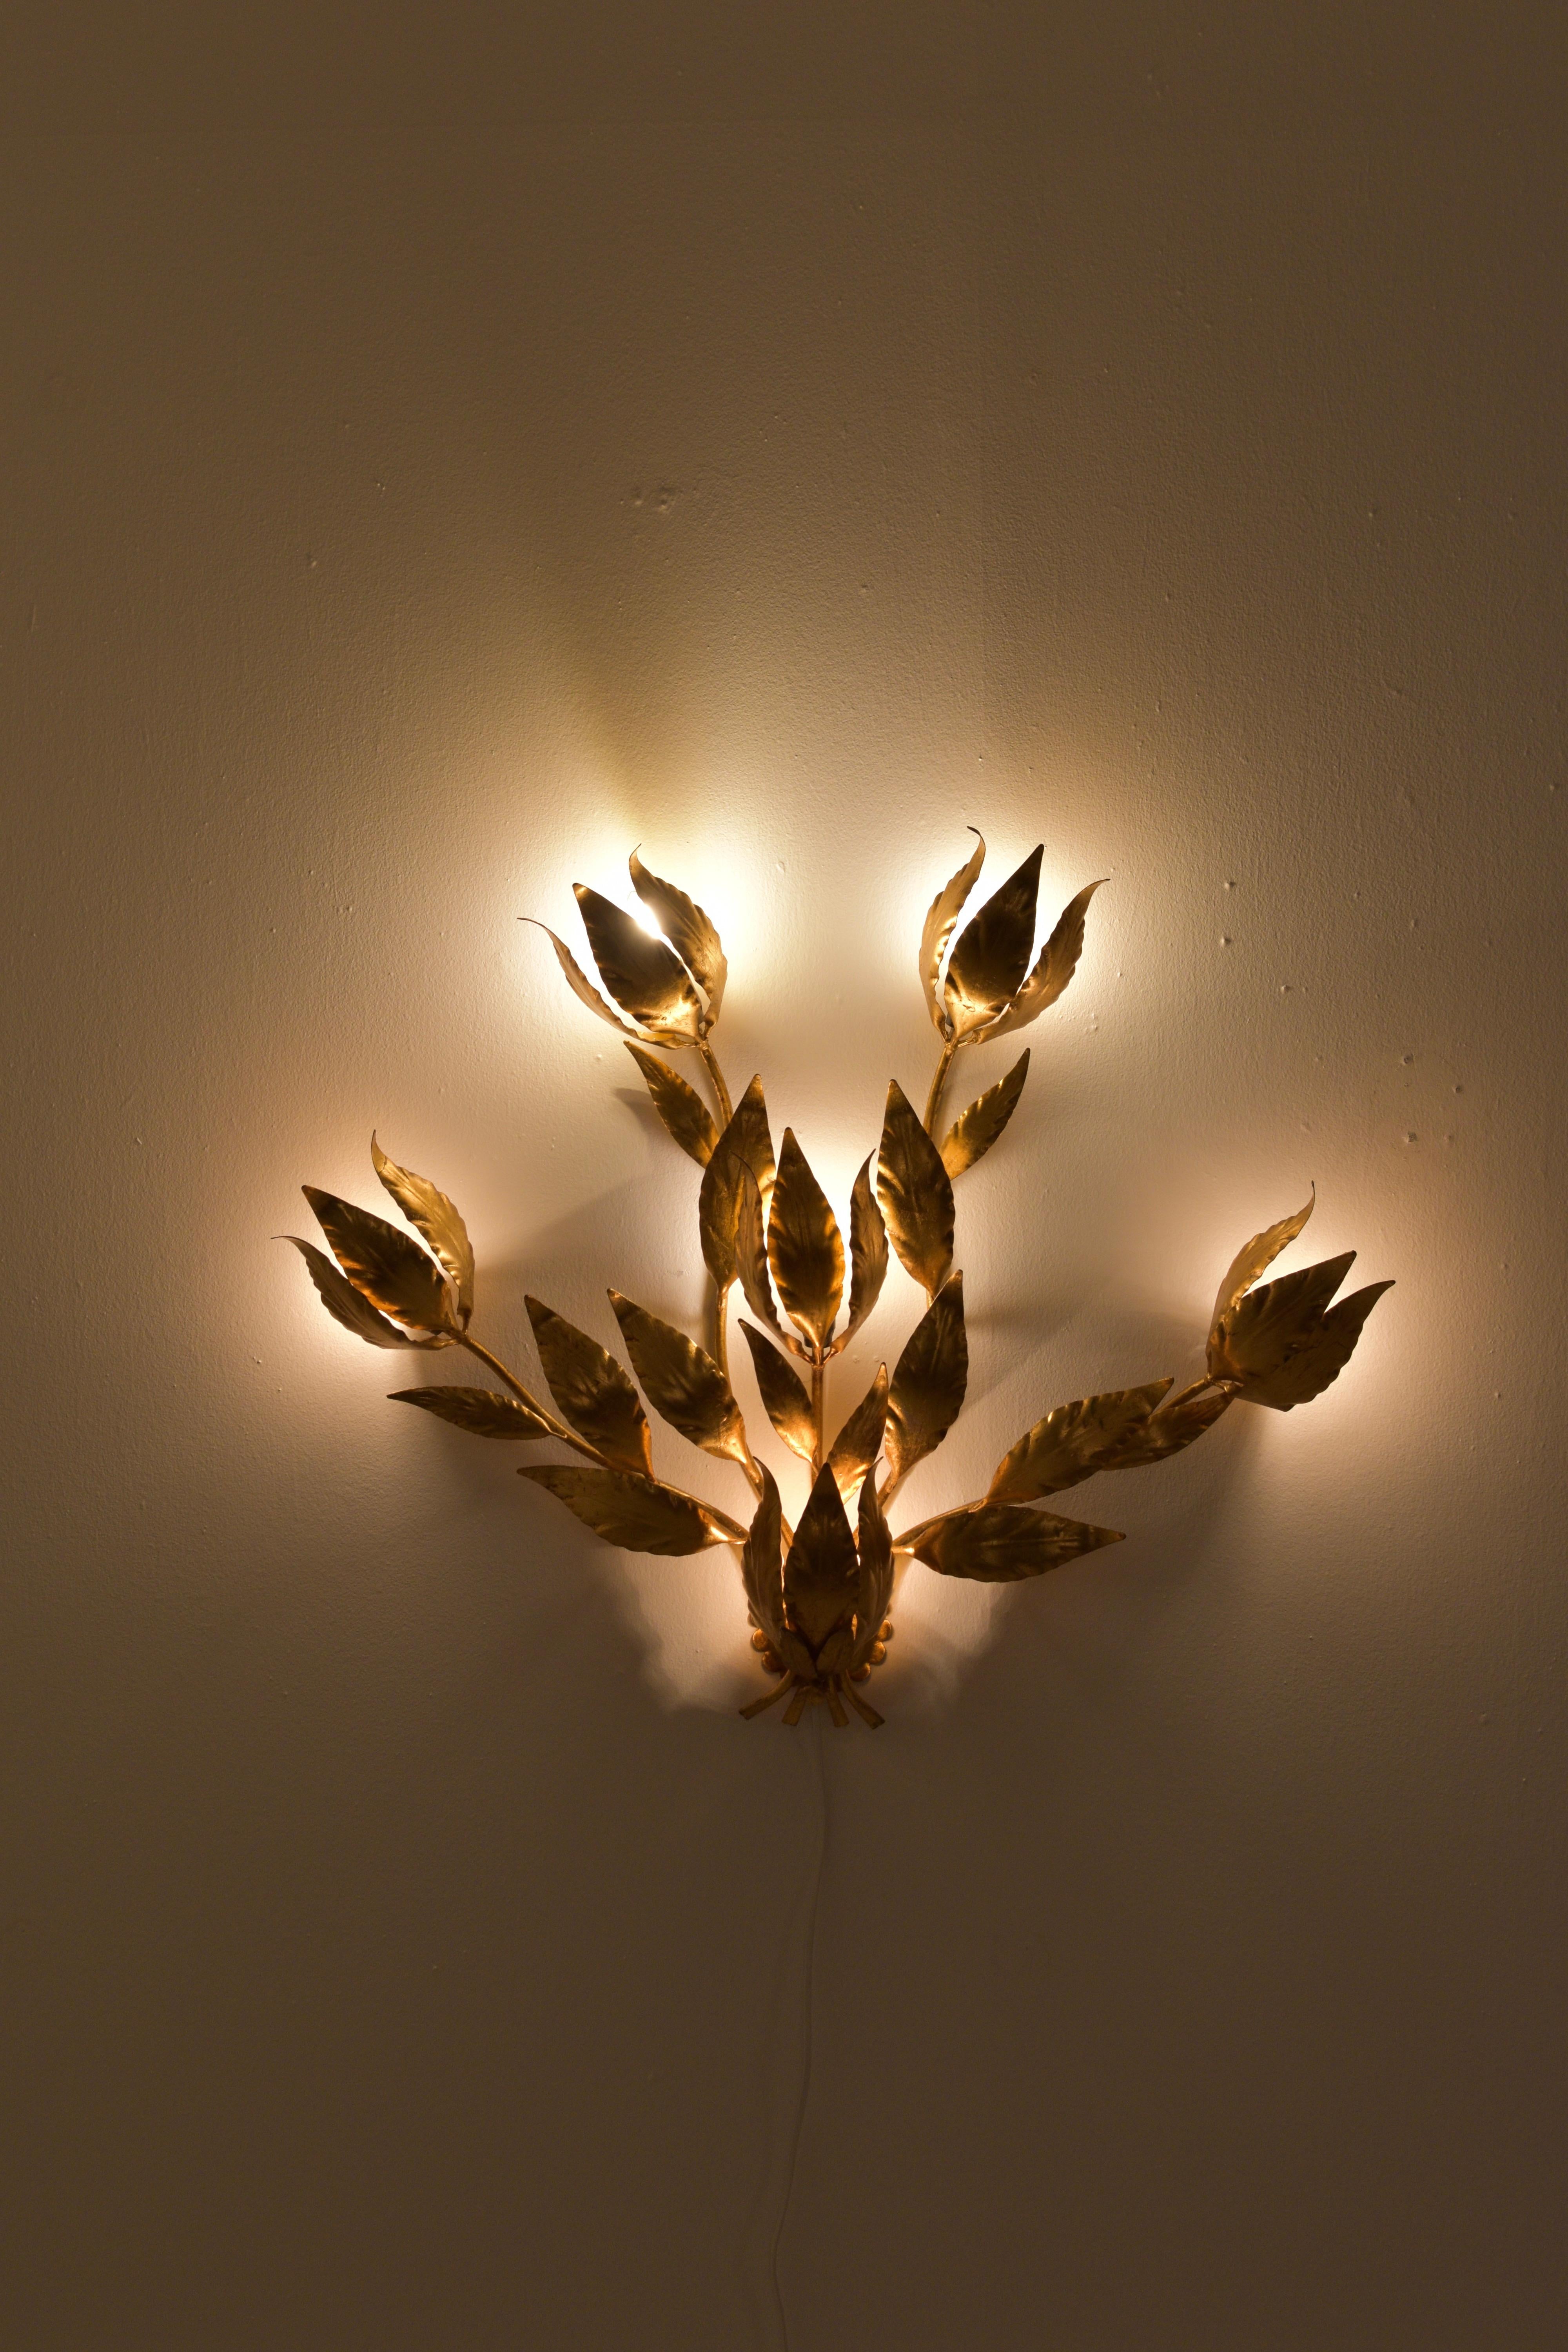 The wall lamp has four branches with leaves. Five light sources are hidden behind the leaves, which give a fantastic glow. This wall lamp is like a piece of jewelry for your wall. This is truly a statement piece for your home!